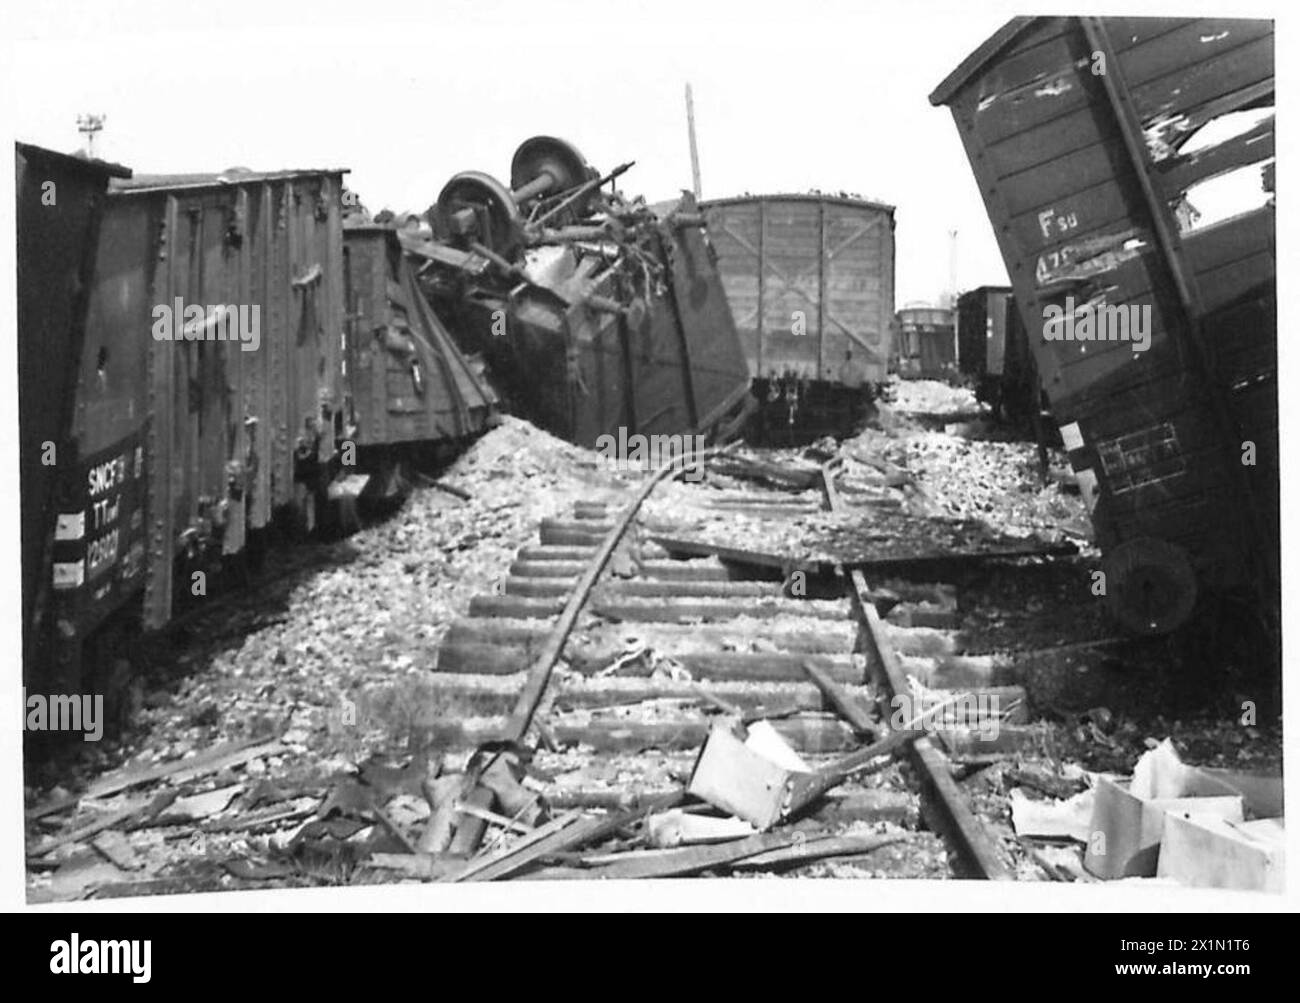 REPAIRING BOMB DAMAGE AT CAEN RAILWAY CENTRE - Damage to the goods wagons and permanent way in the goods yards, British Army, 21st Army Group Stock Photo